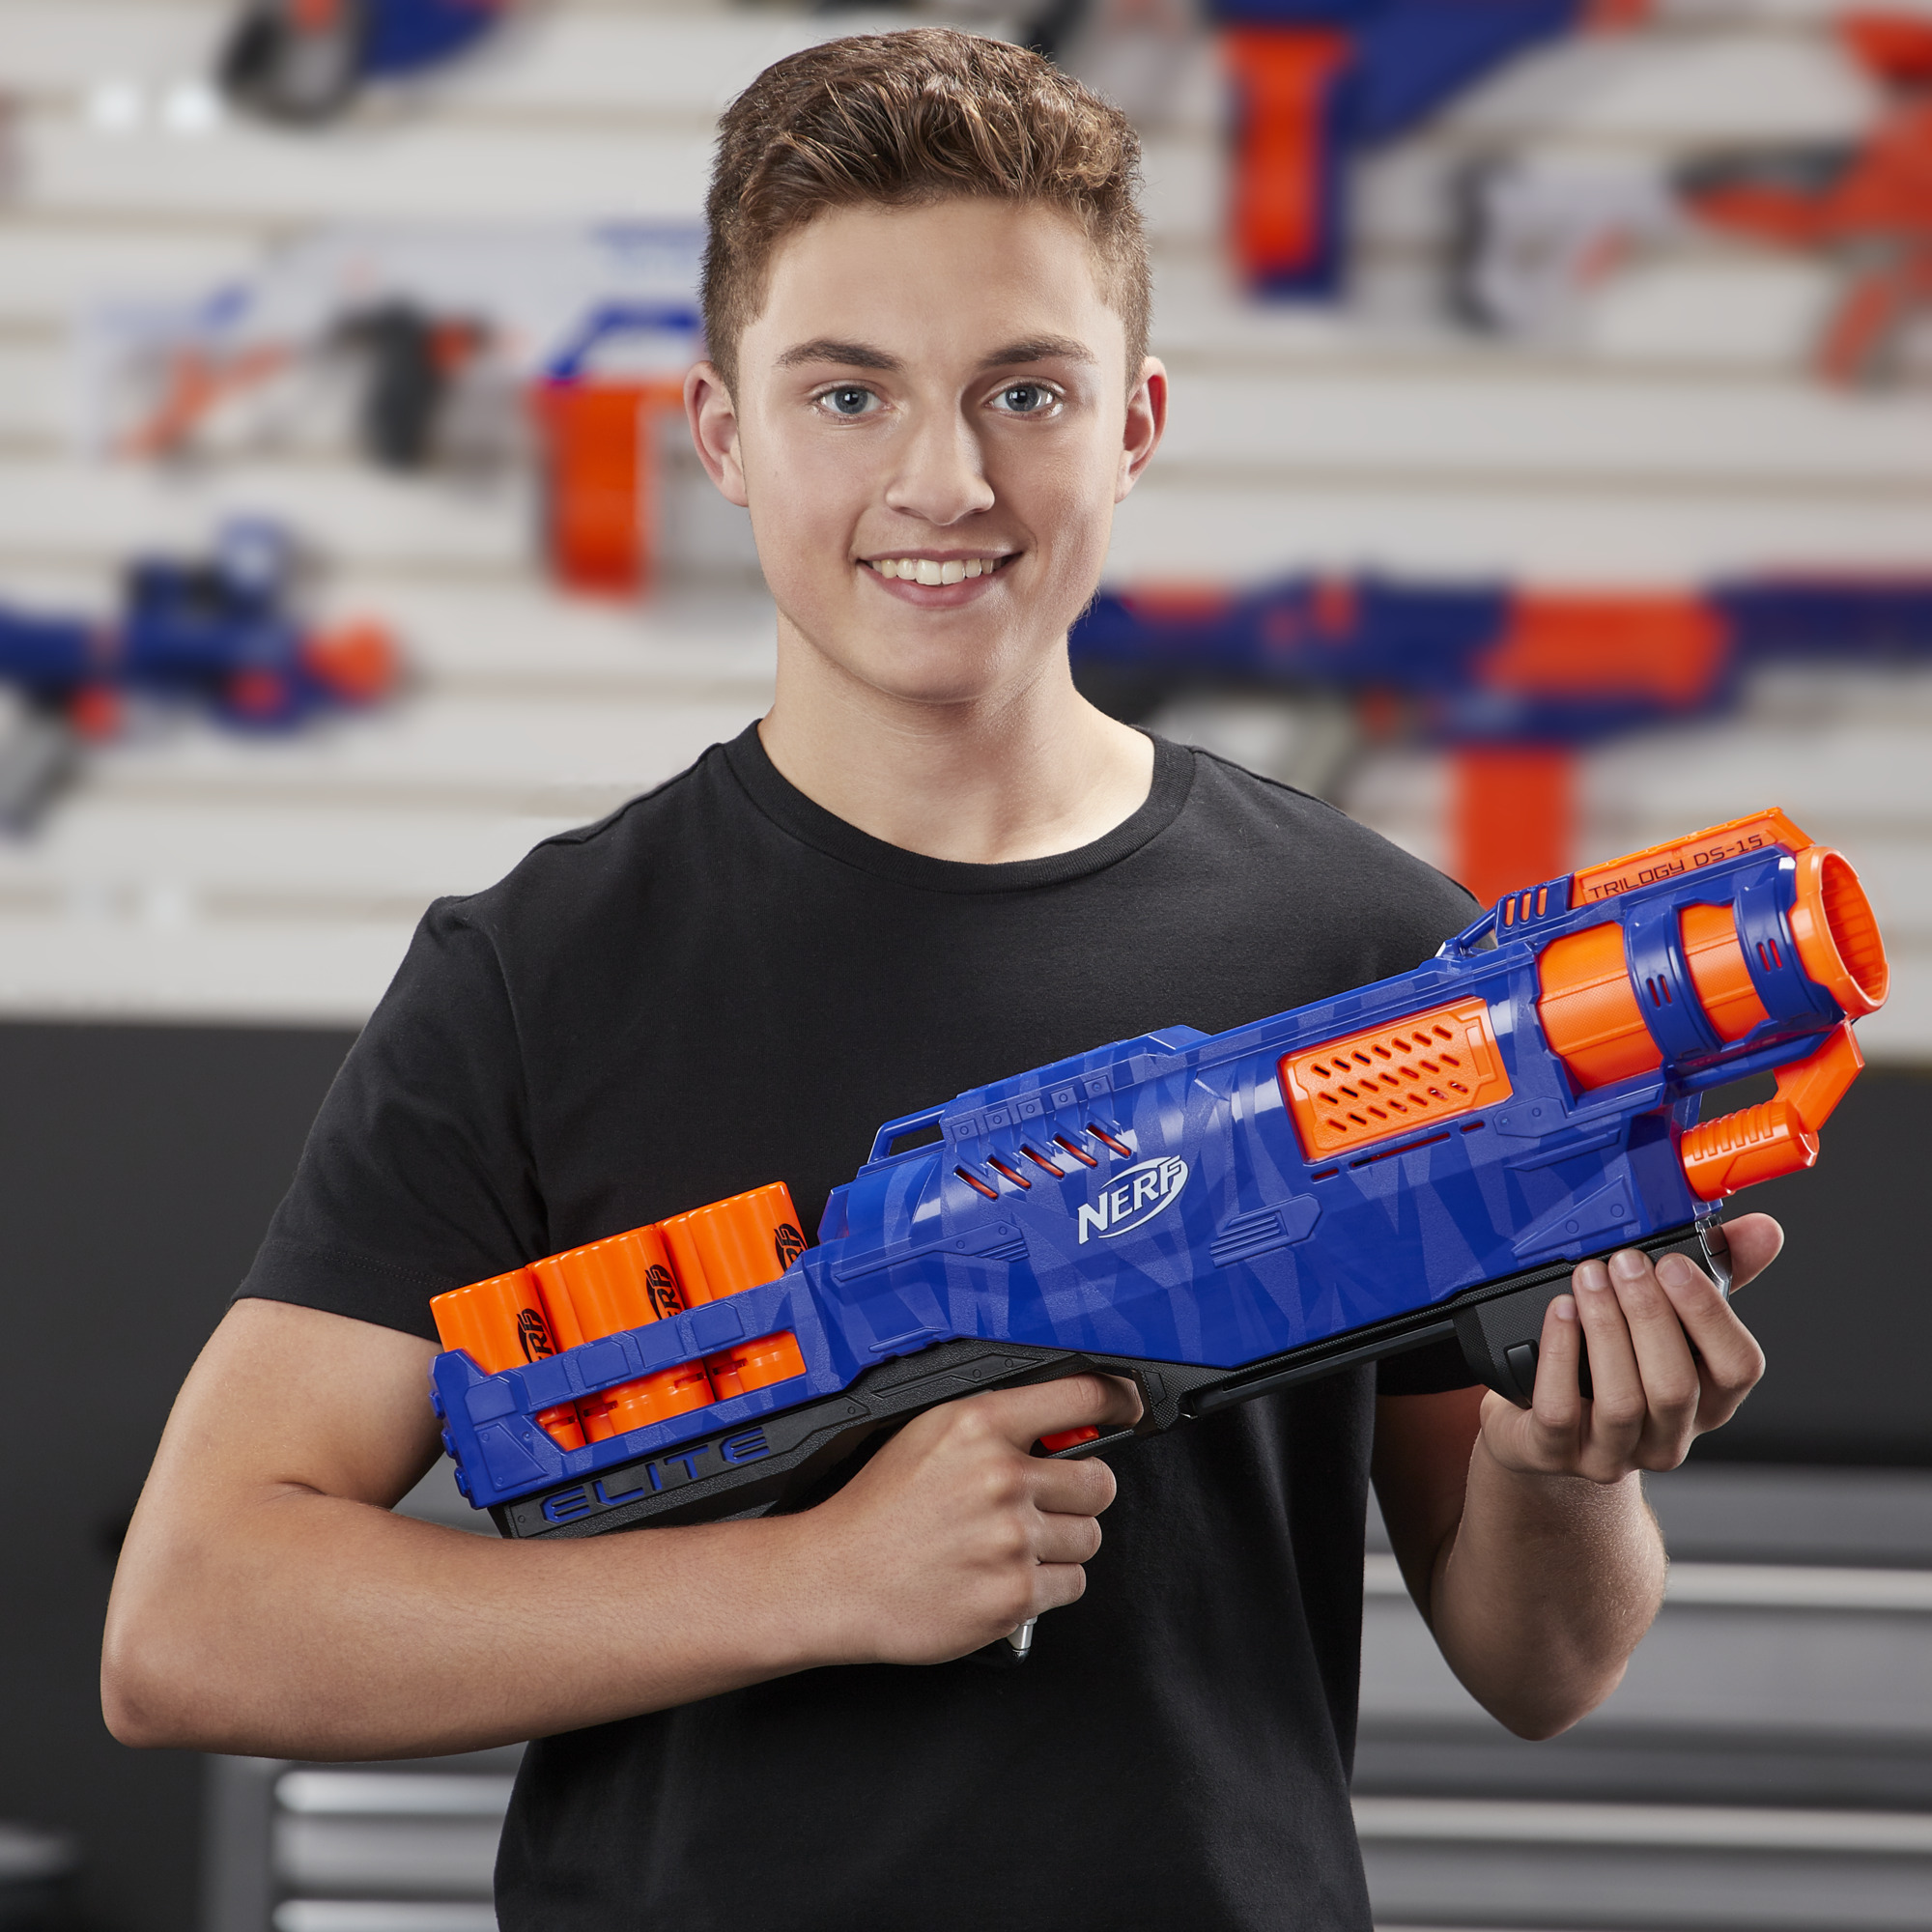 Trilogy DS-15 Nerf N-Strike Elite Toy Blaster with 15 Official Nerf Elite Darts and 5 Shells – For Kids, Teens, Adults - image 2 of 11